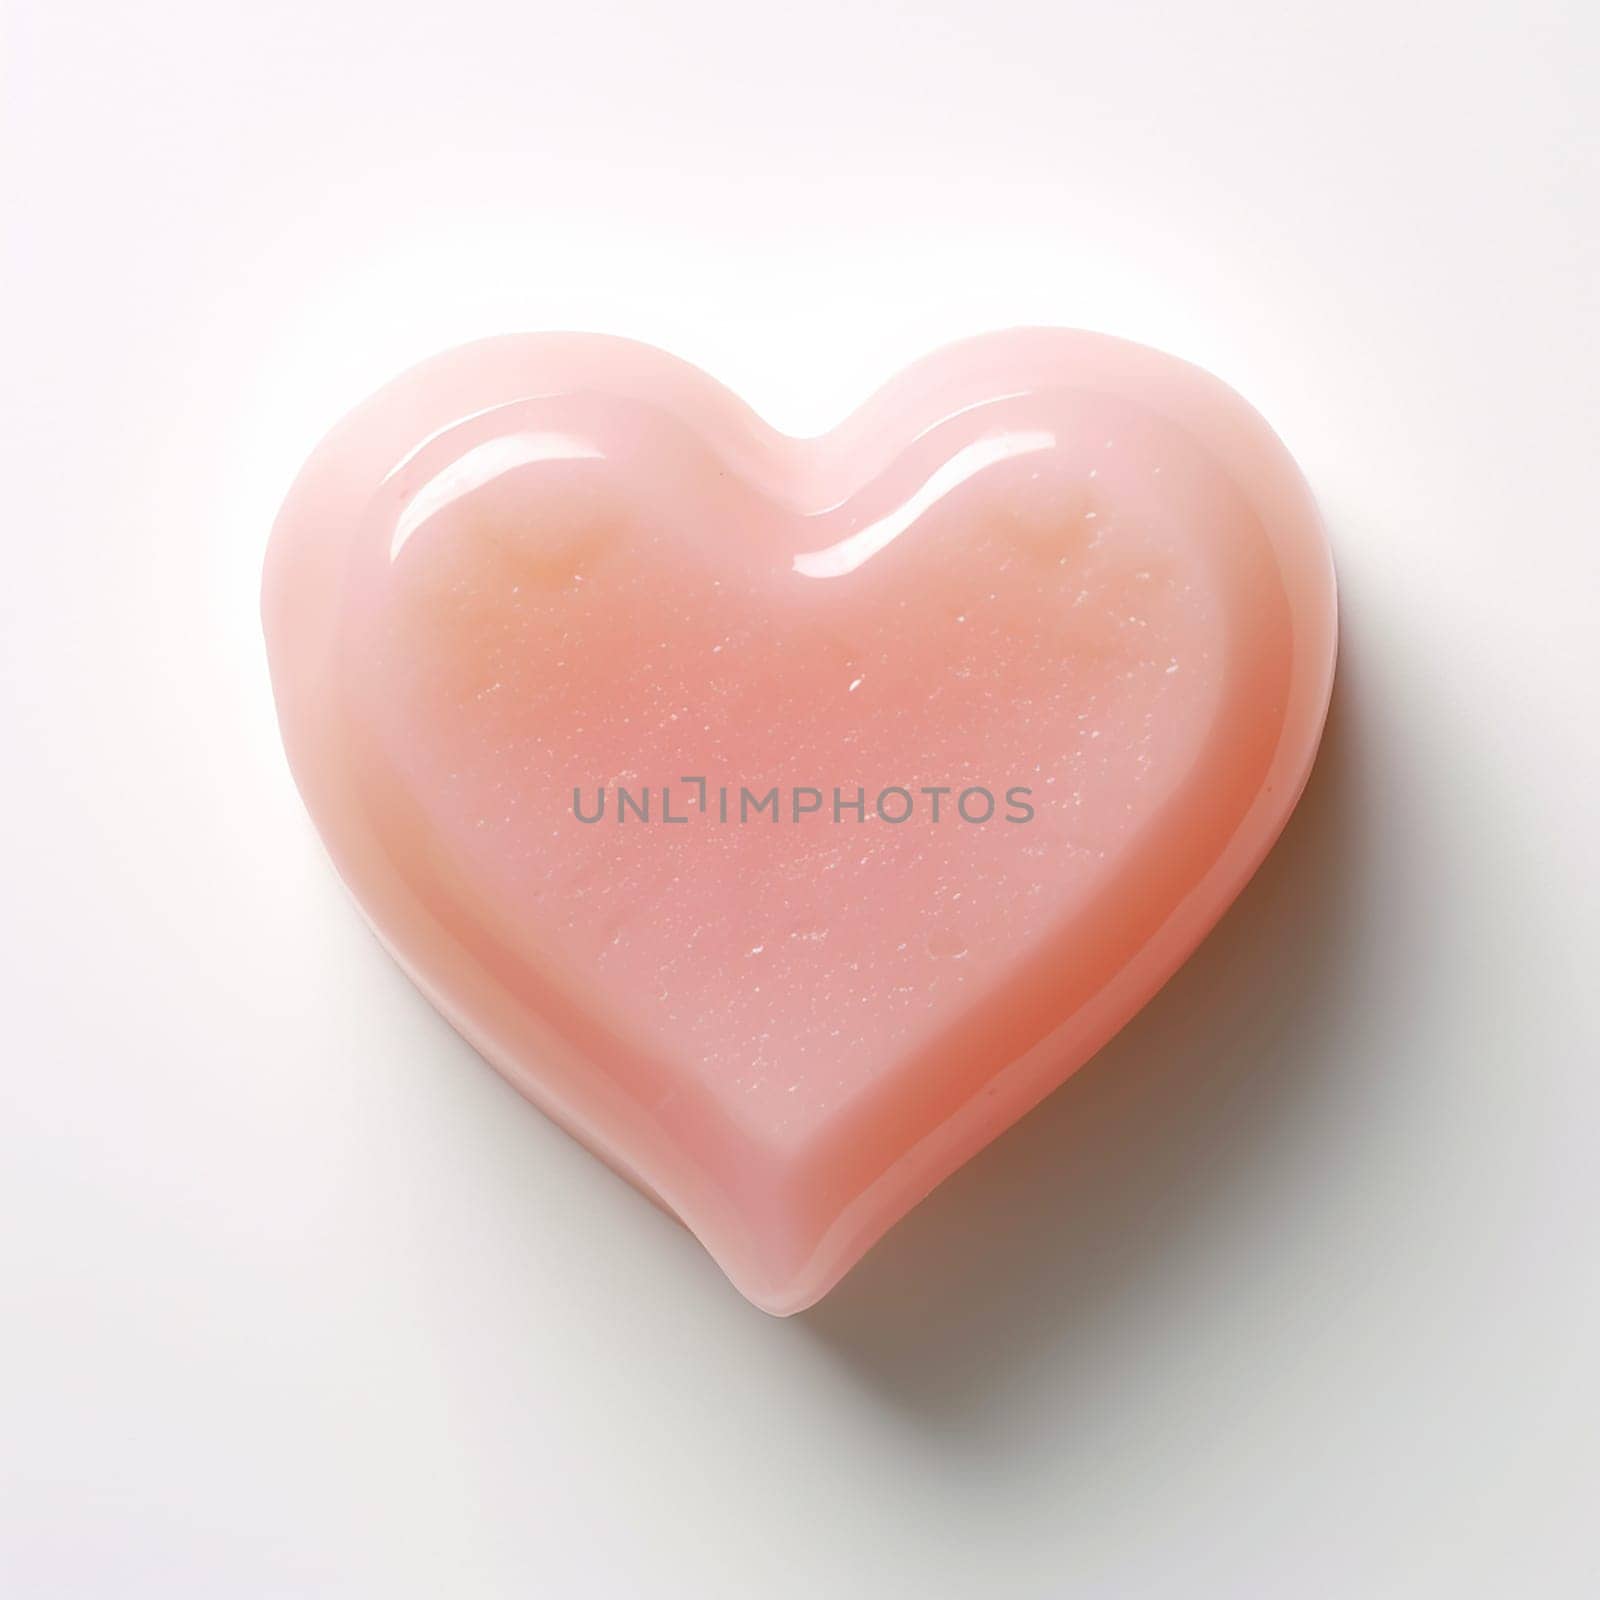 Pink heart-shaped object with a glossy finish on white background